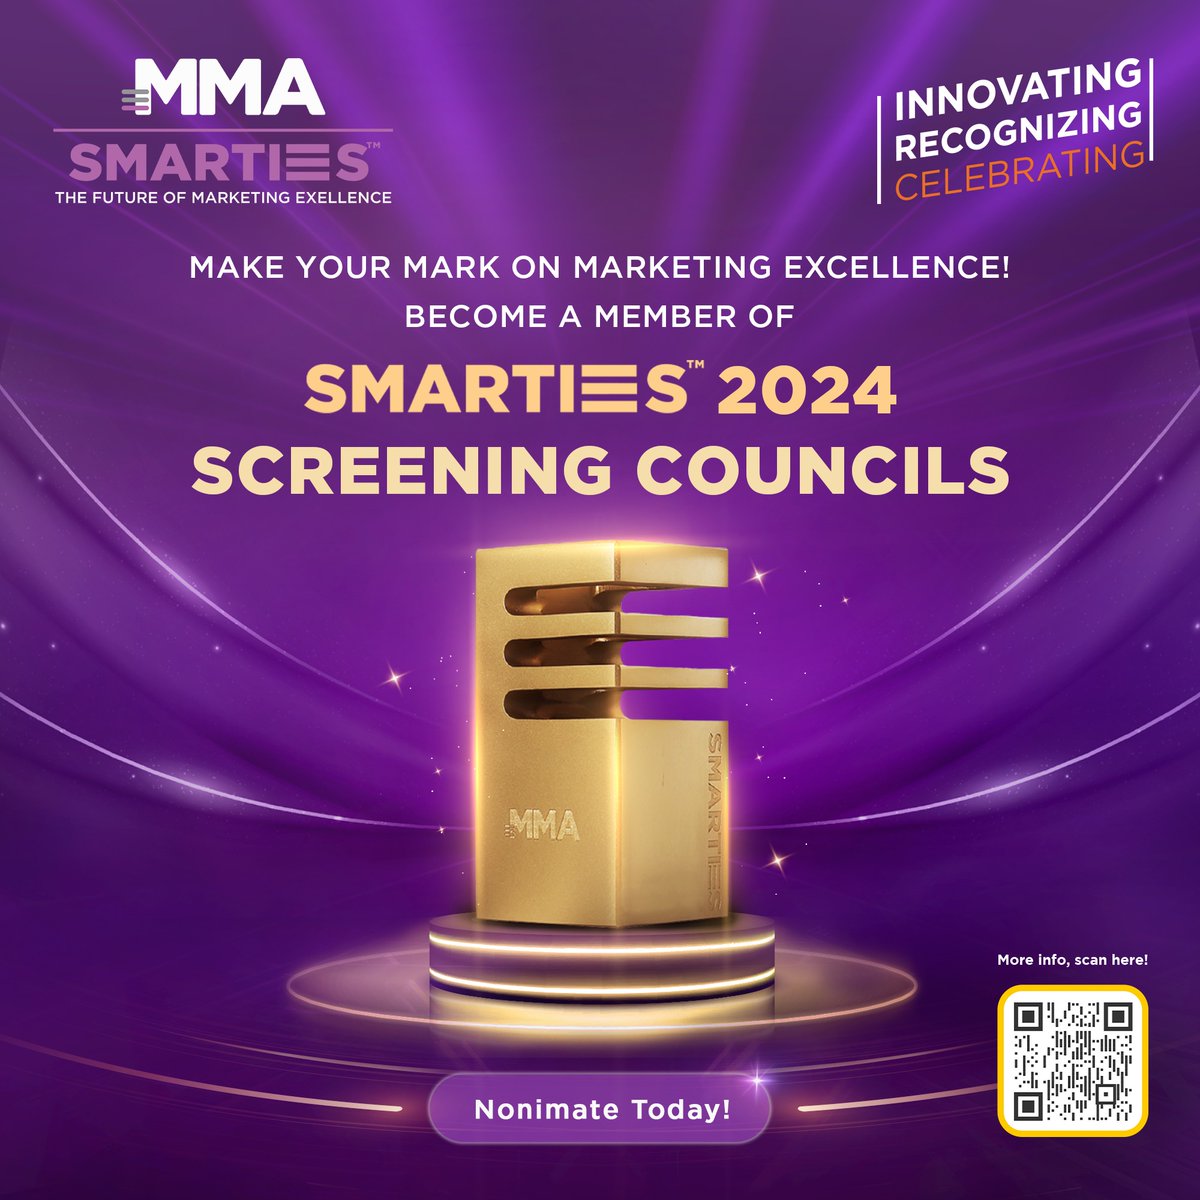 '🌟 Make Your Mark on Marketing Excellence! Become a Member of SMARTIES 2024 Screening Councils 🌟

If so, we want to hear from you! Submit your interest NOW: mmaglobal.com/nomination-sma…

#SMARTIESAwards #MarketingExcellence #PreScreener #Opportunity #MarketingCommunity'